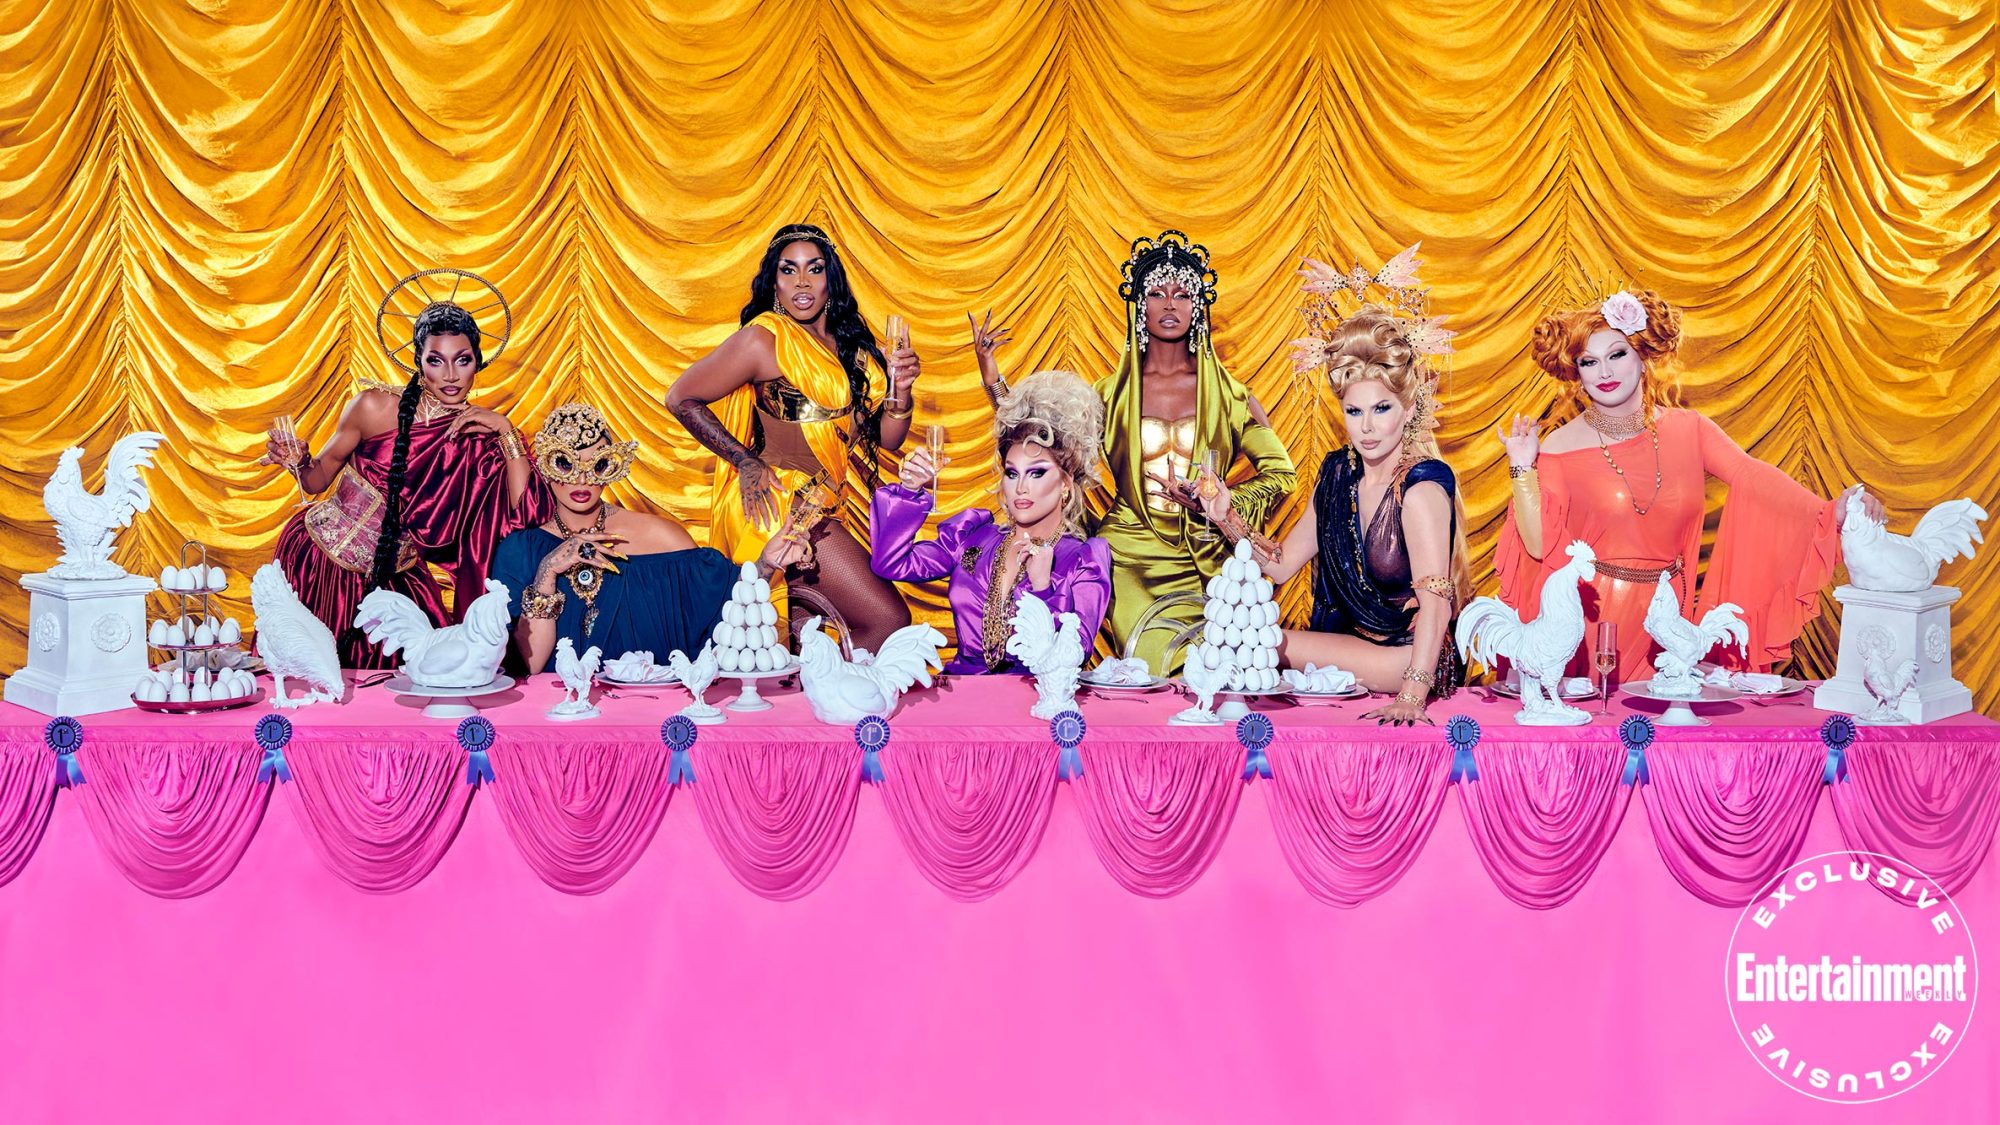 Bob the Drag Queen returns as The Pit Stop host for RuPaul's Drag Race All Stars 7